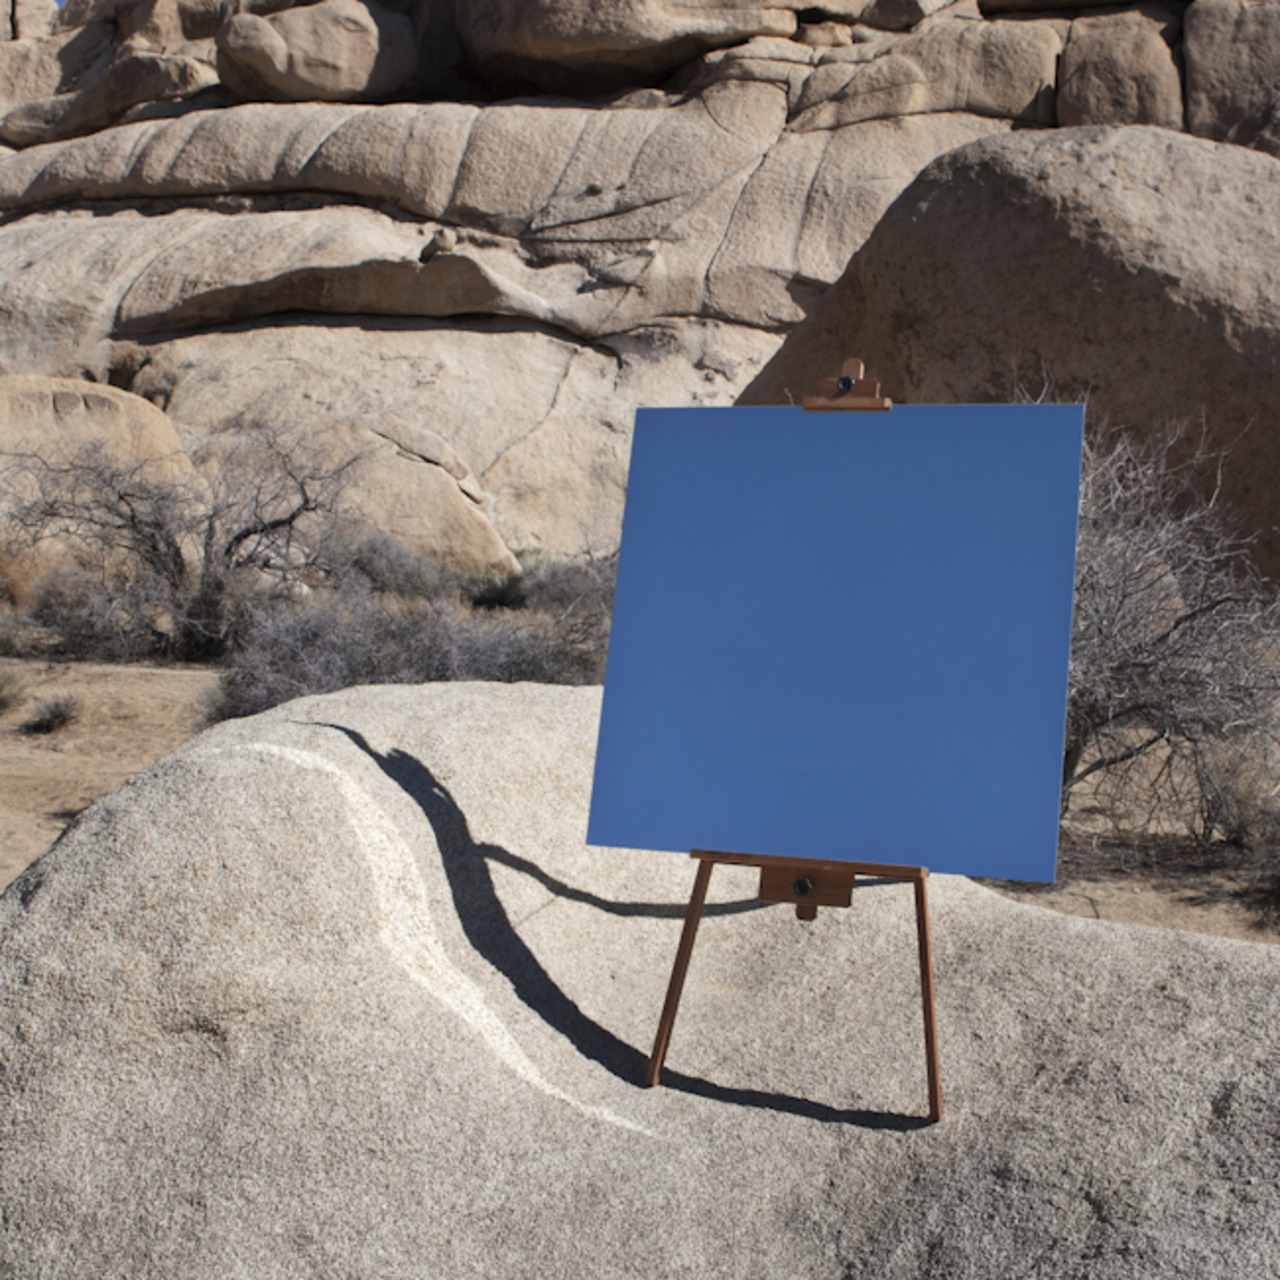 asylum-art:Photographs of Mirrors on Easels that Look Like Paintings in the Desert